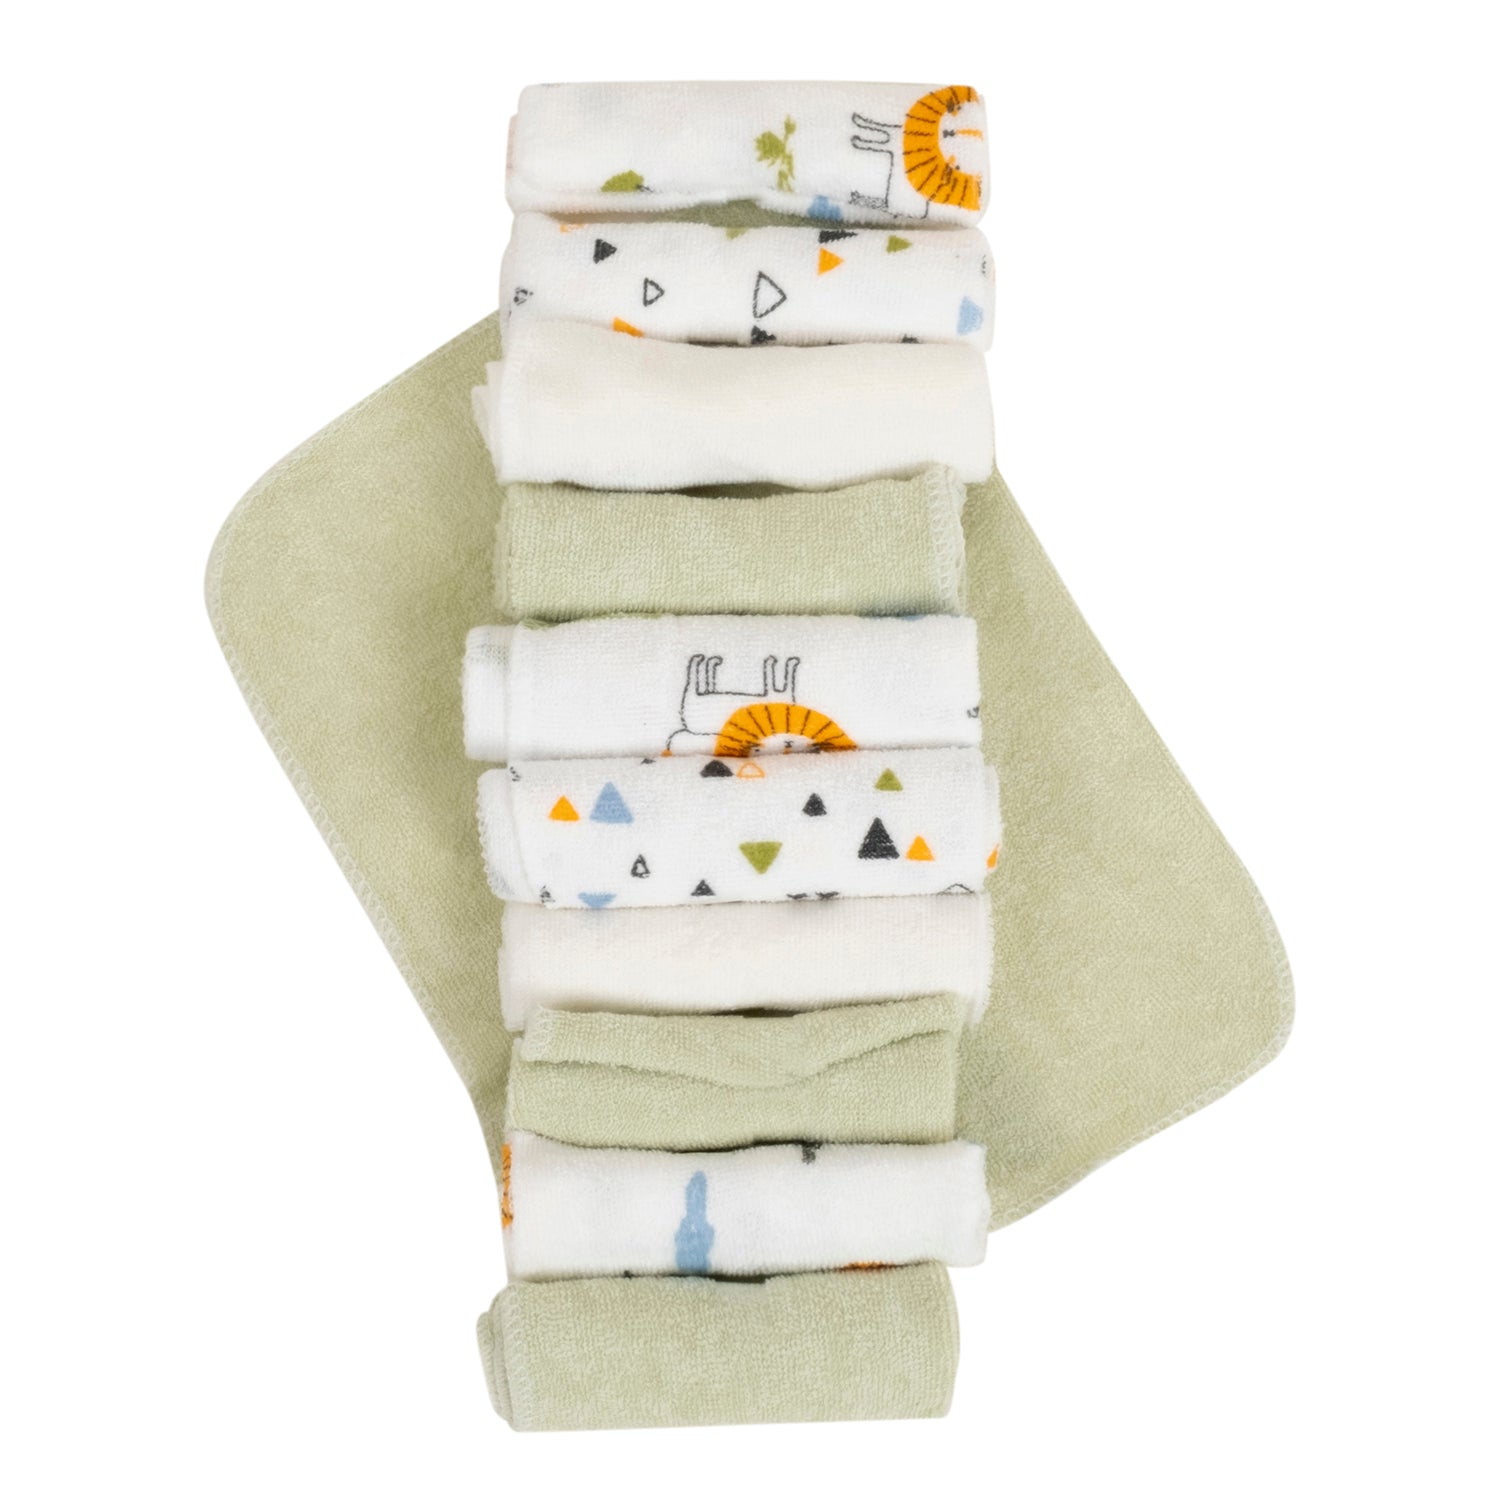 Baby Moo Little Blossoms Soft And Absorbent Handkerchief Napkins For Infant Face And Body Pack Of 12 Wash Cloth - Green